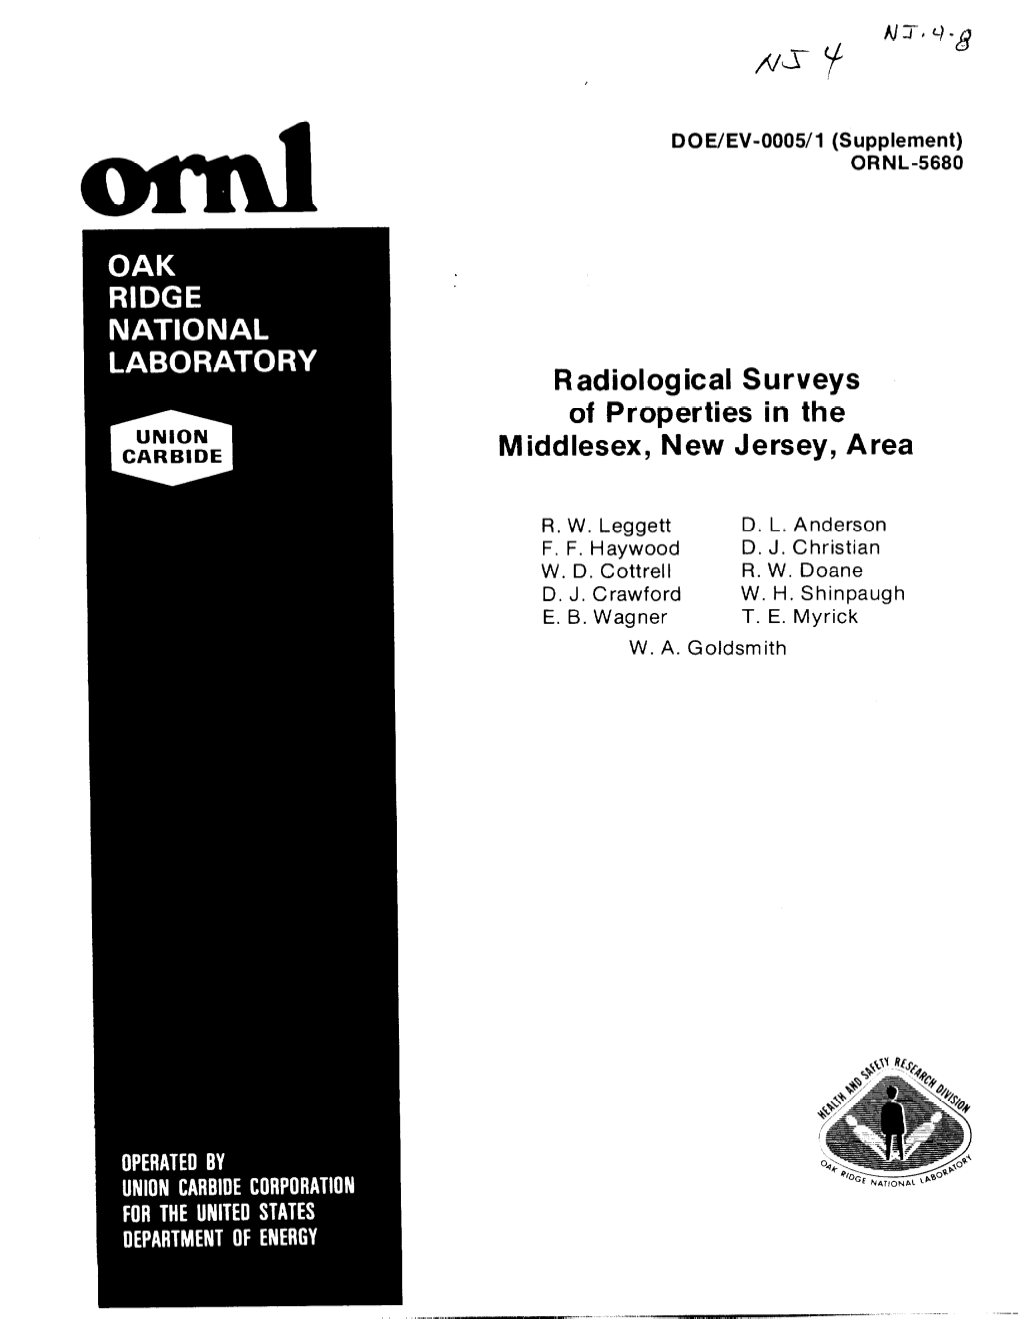 Radiological Surveys of Properties in the Middlesex, New Jersey, Area